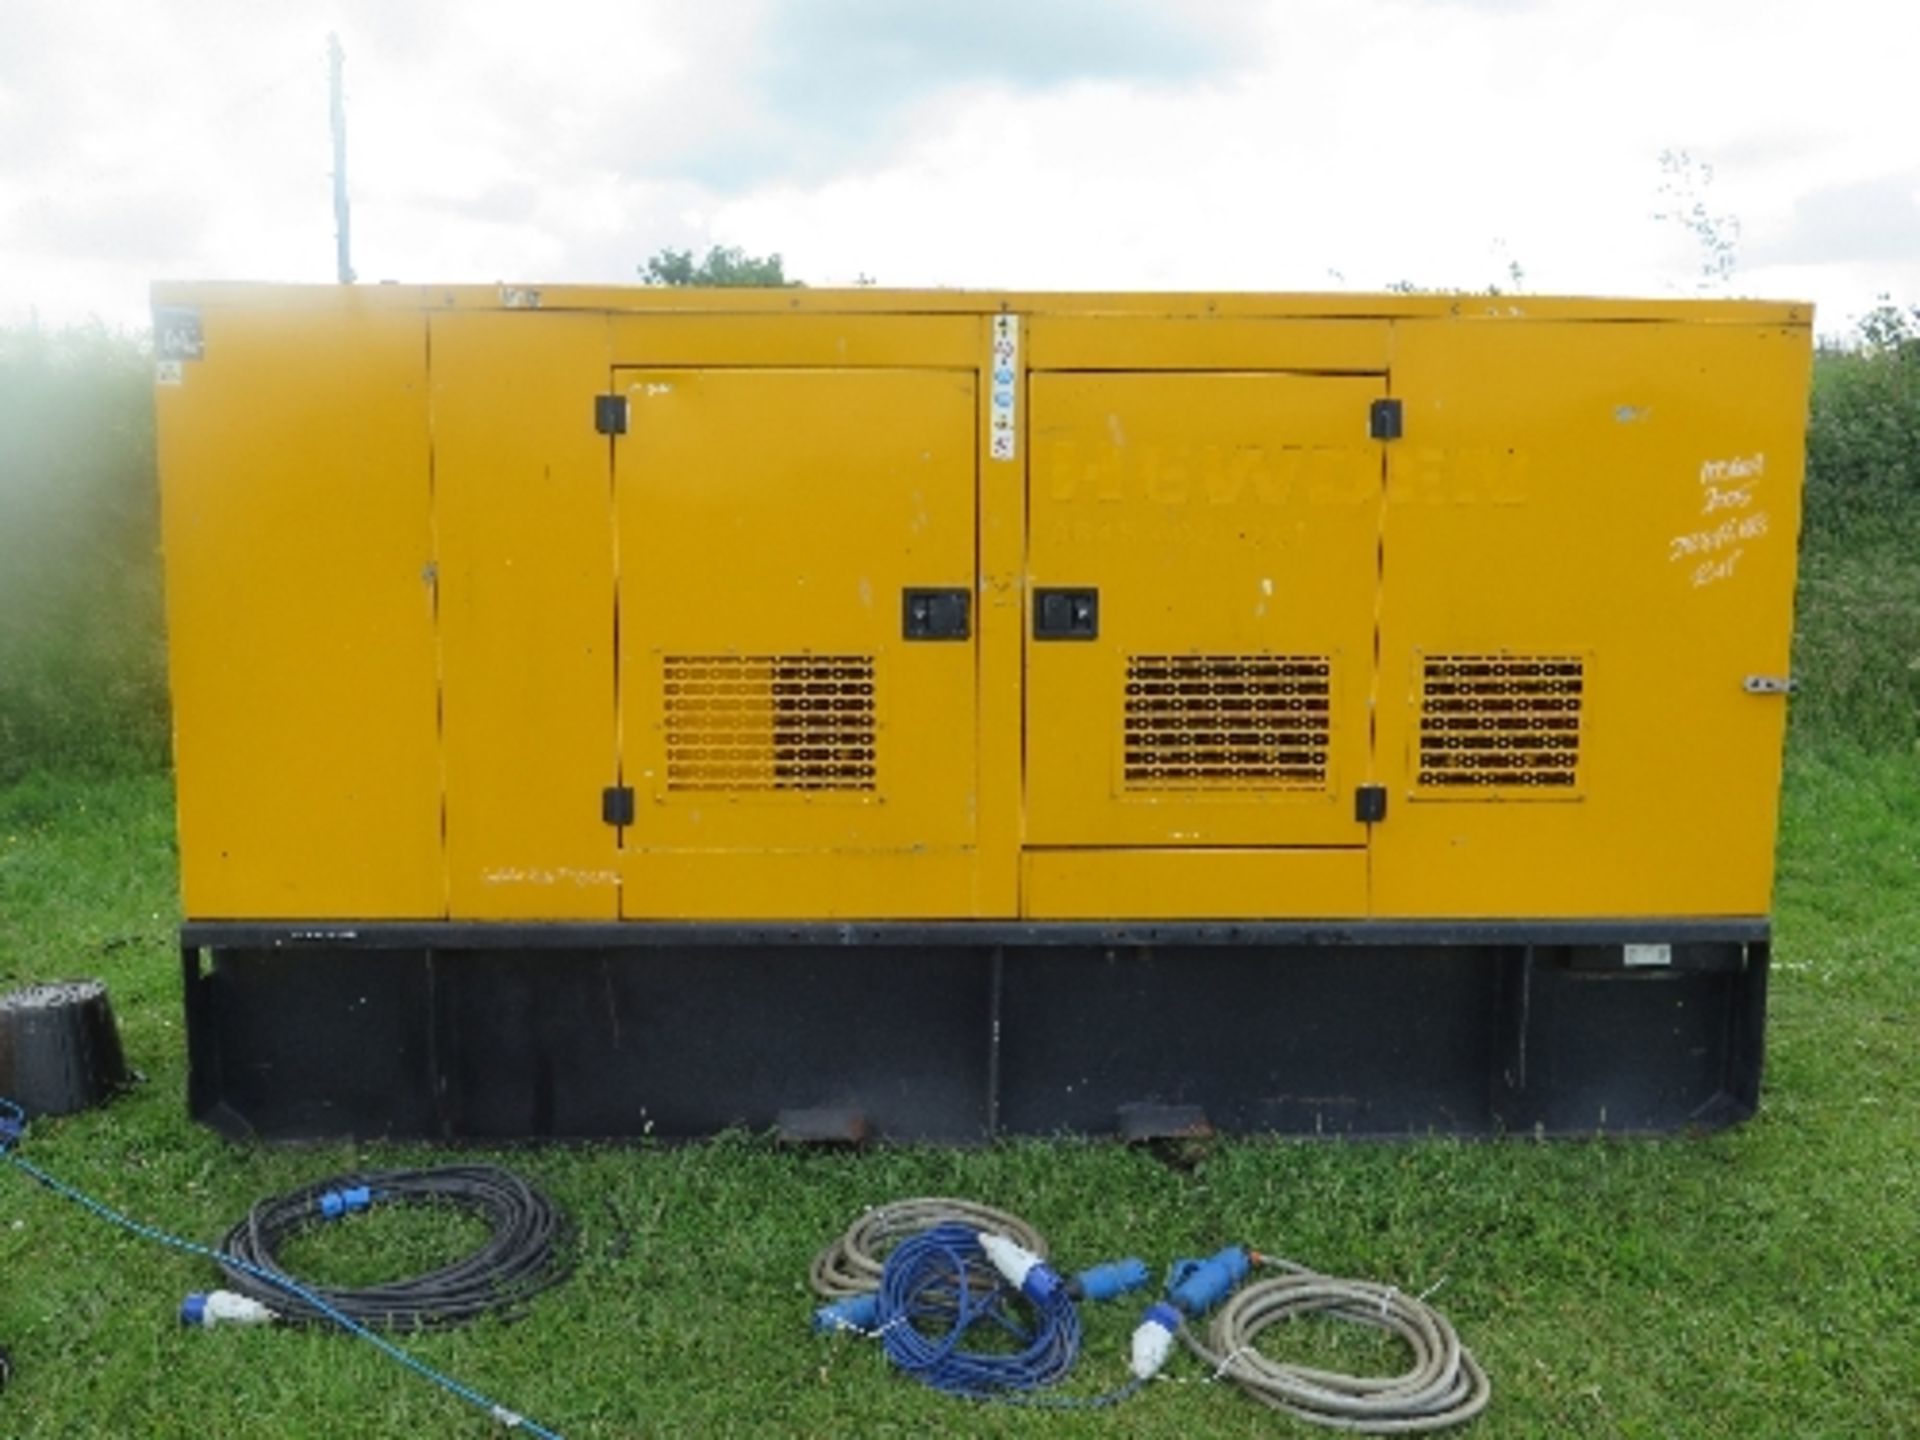 Caterpillar XQE100 generator 28476 hrs 138855 Please note this machine will be retained for